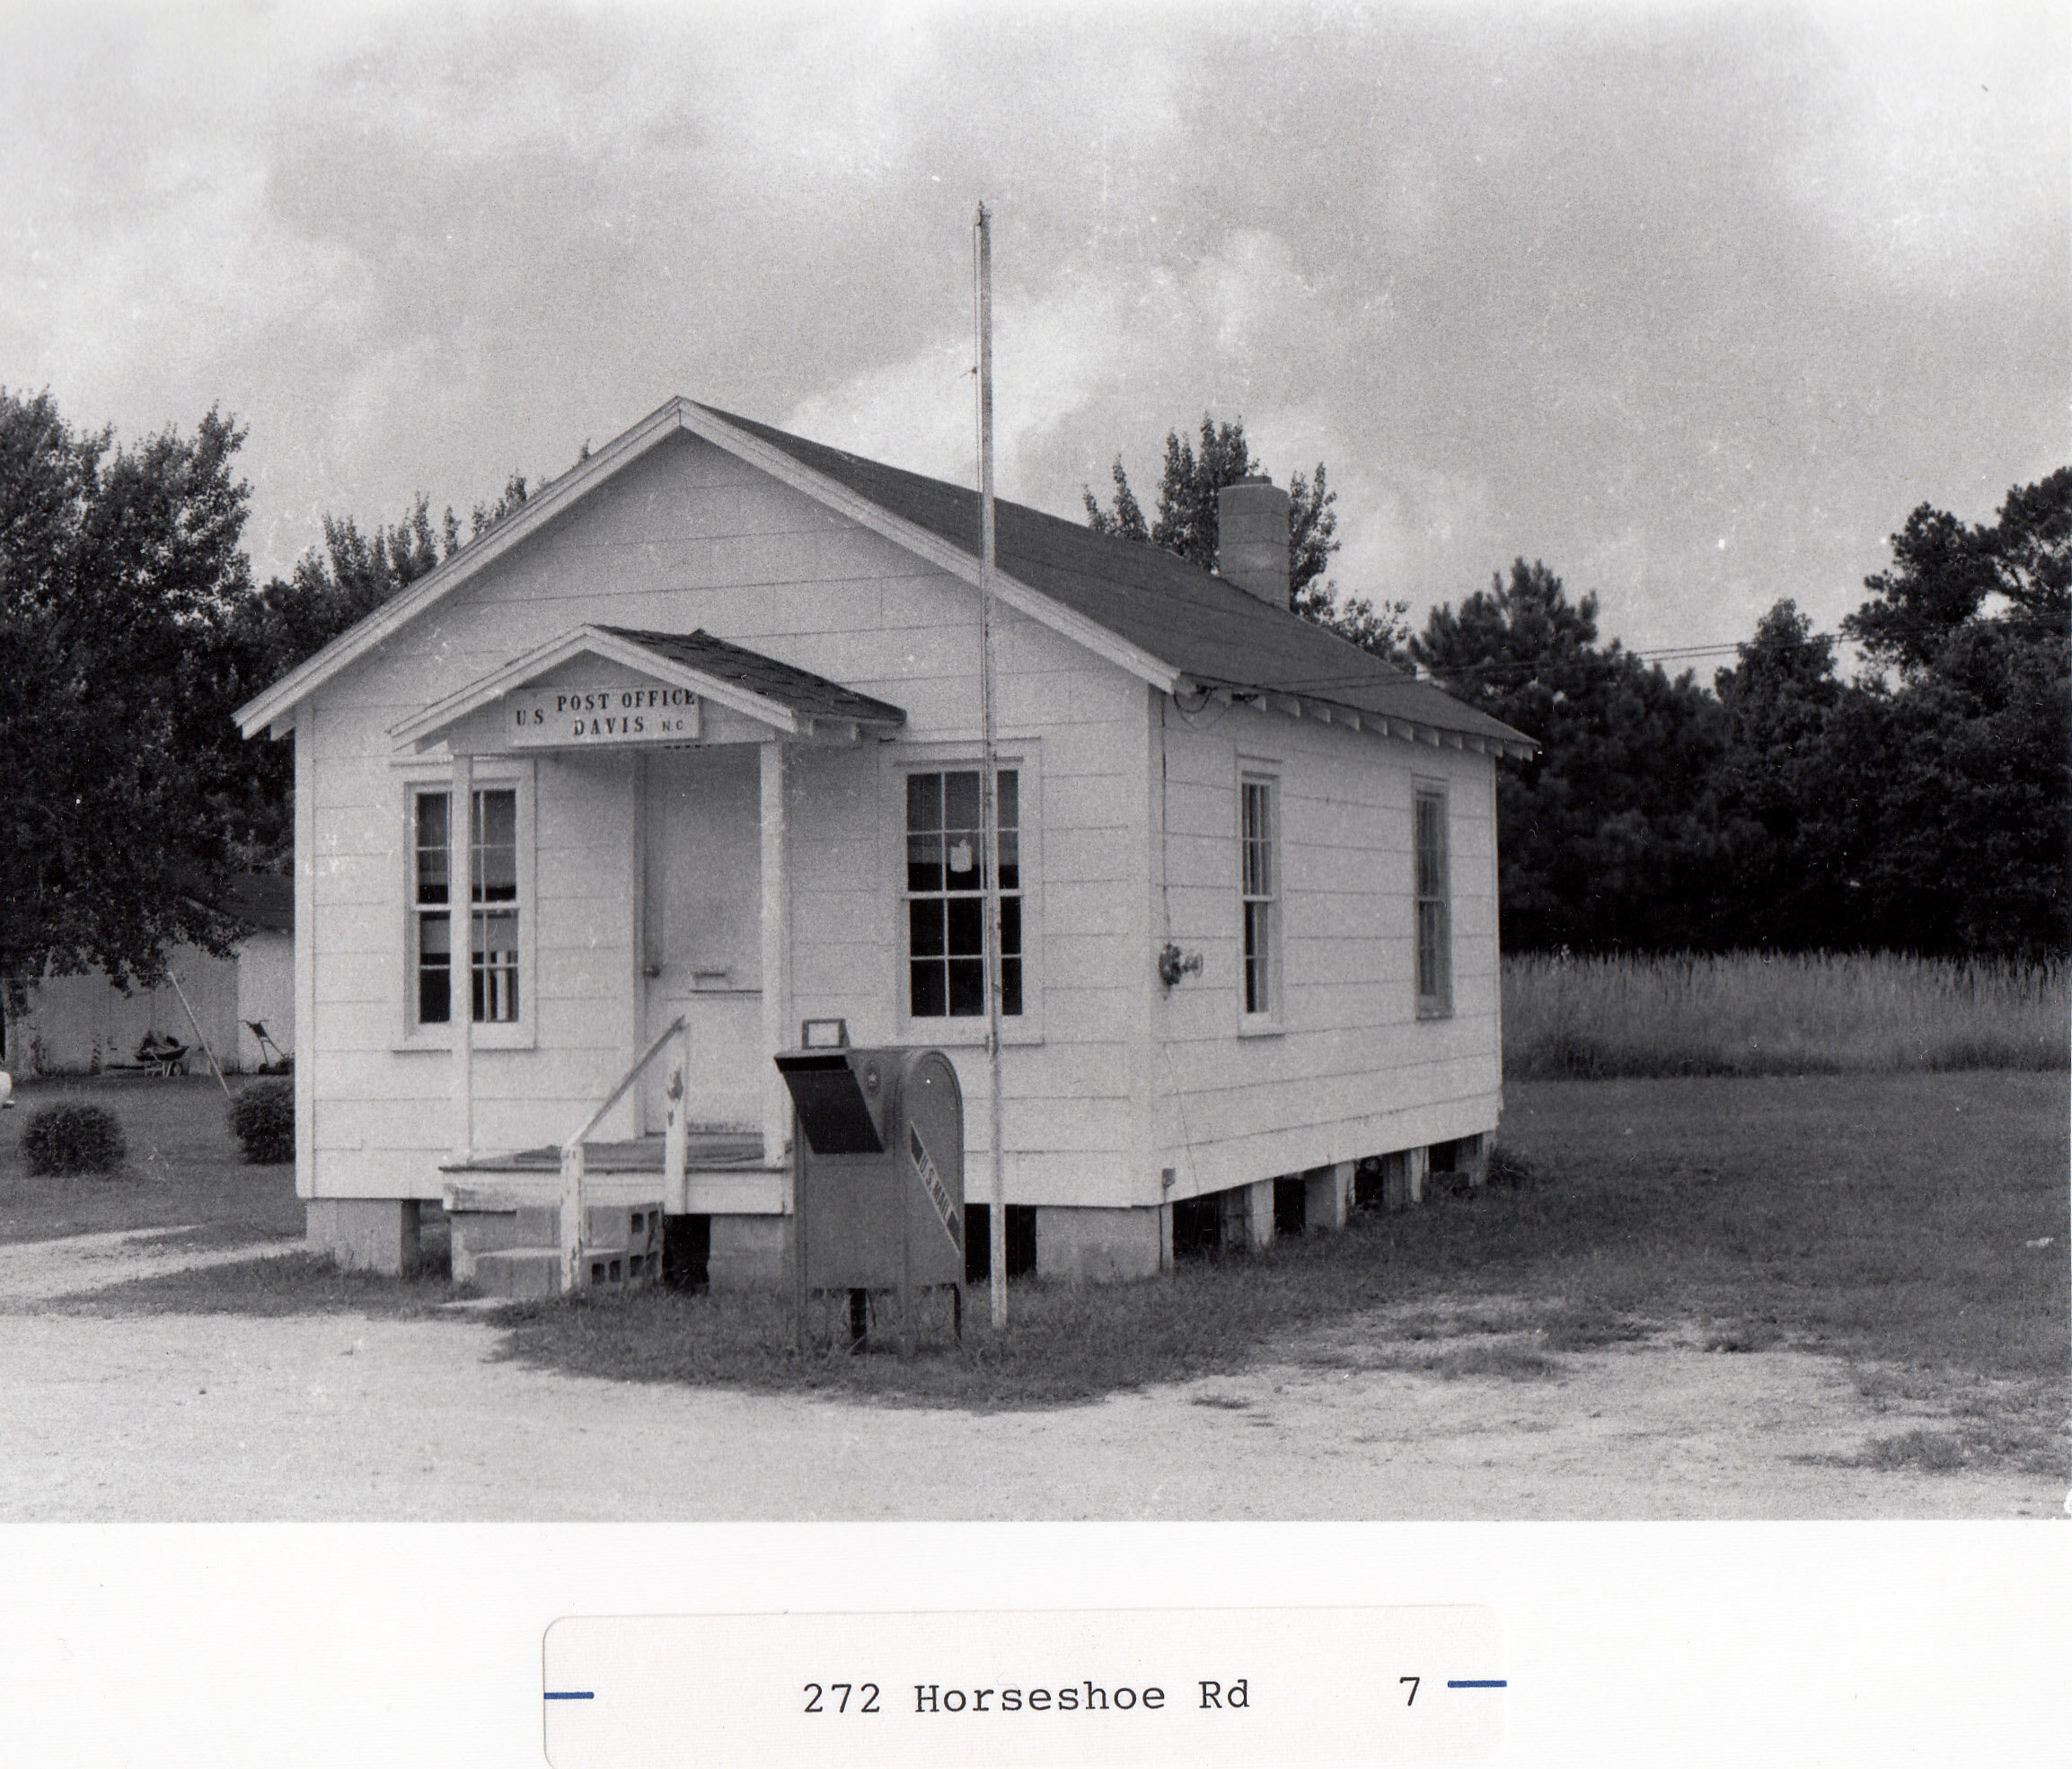  The first Davis Post Office at 272 Horseshoe Road was used only as a Post Office instead of combining with a store as was the earlier practice. Ms. Myrtle was the postmistress and would deliver the mail to shut-ins who didn't drive. Before the new P